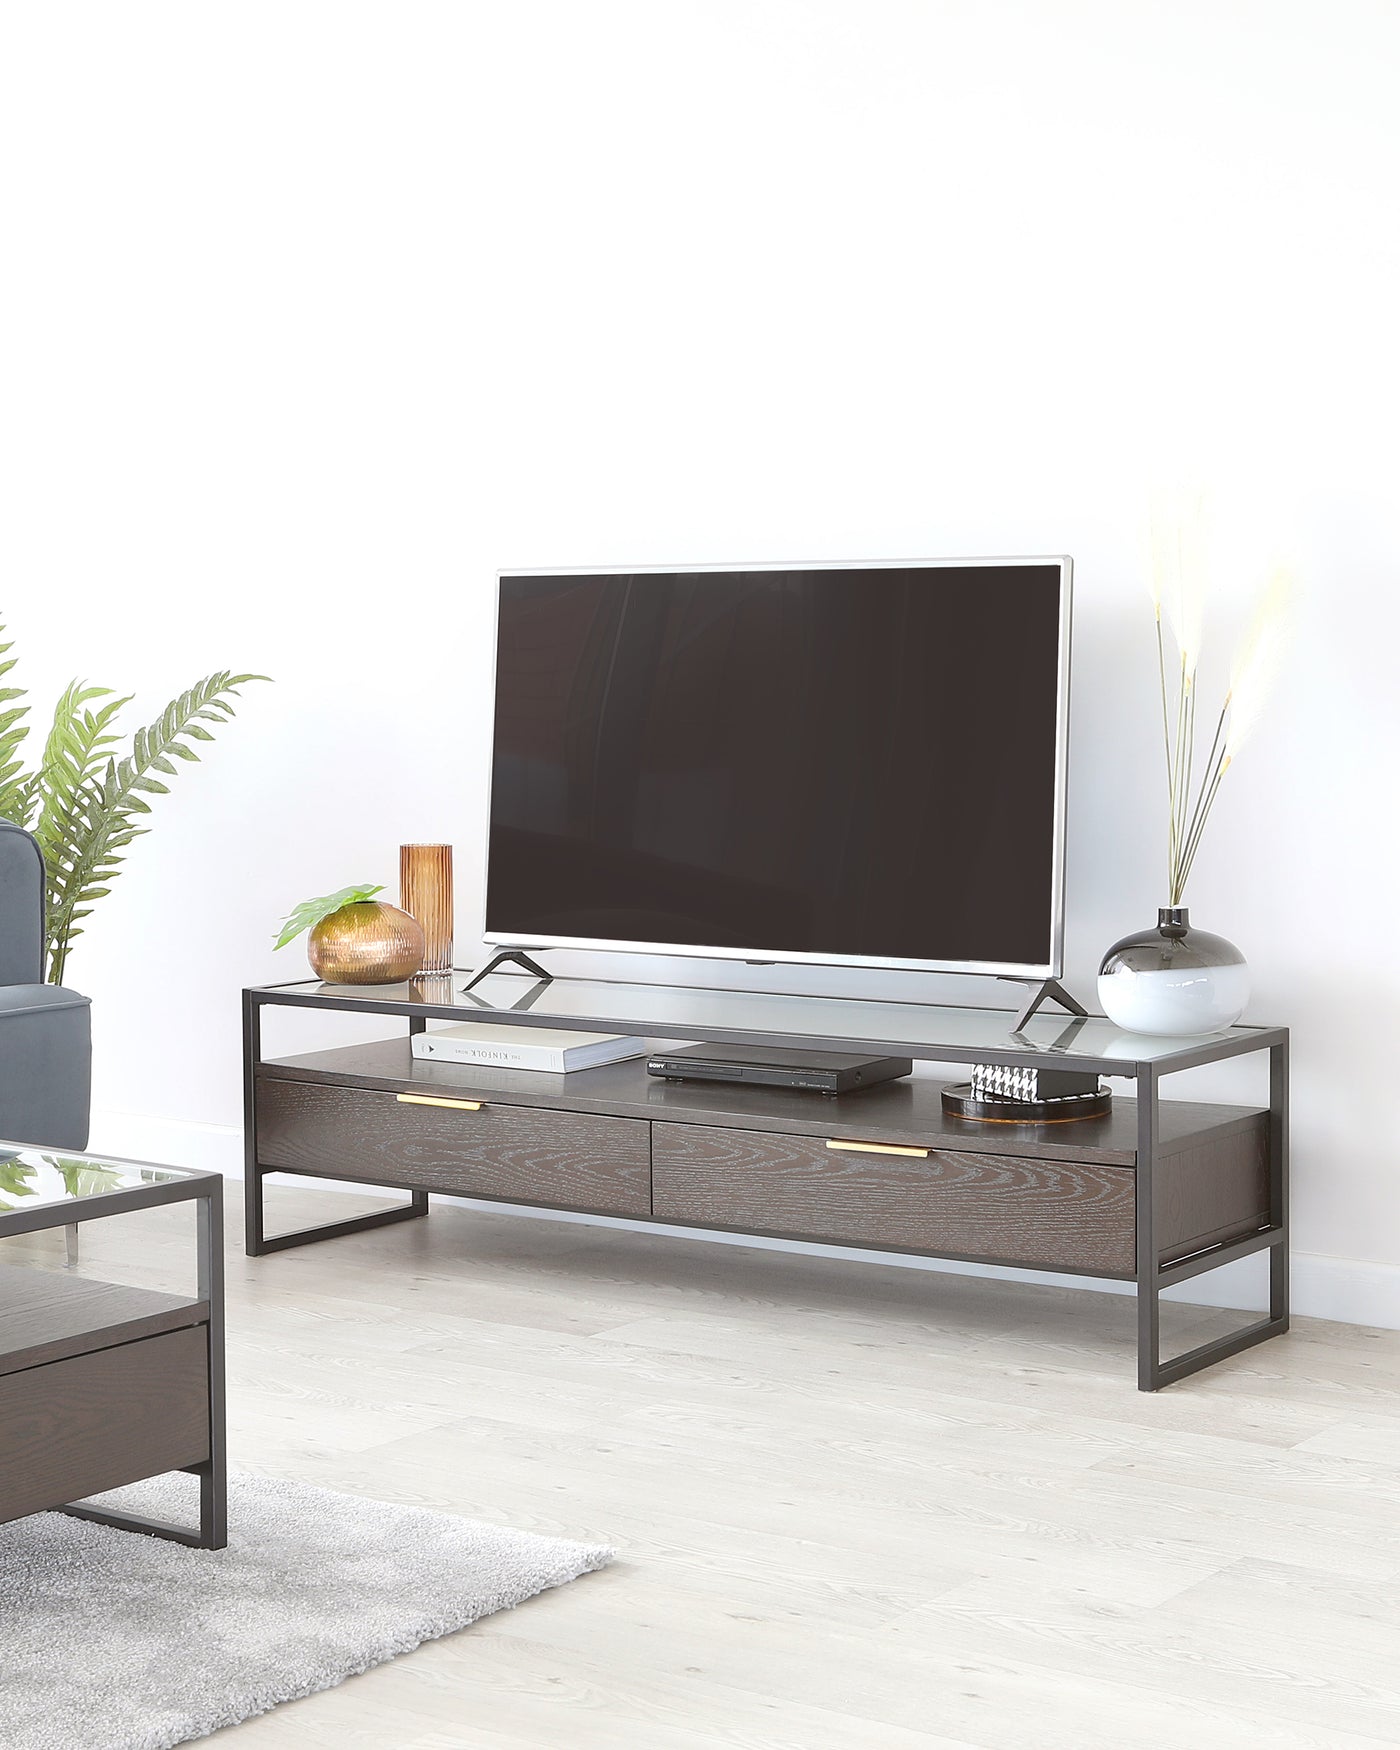 Modern minimalist TV stand with a dark wood finish and metal frame, featuring two drawers and an open shelf, accompanied by a sleek matching coffee table with a glass top and a wooden drawer.